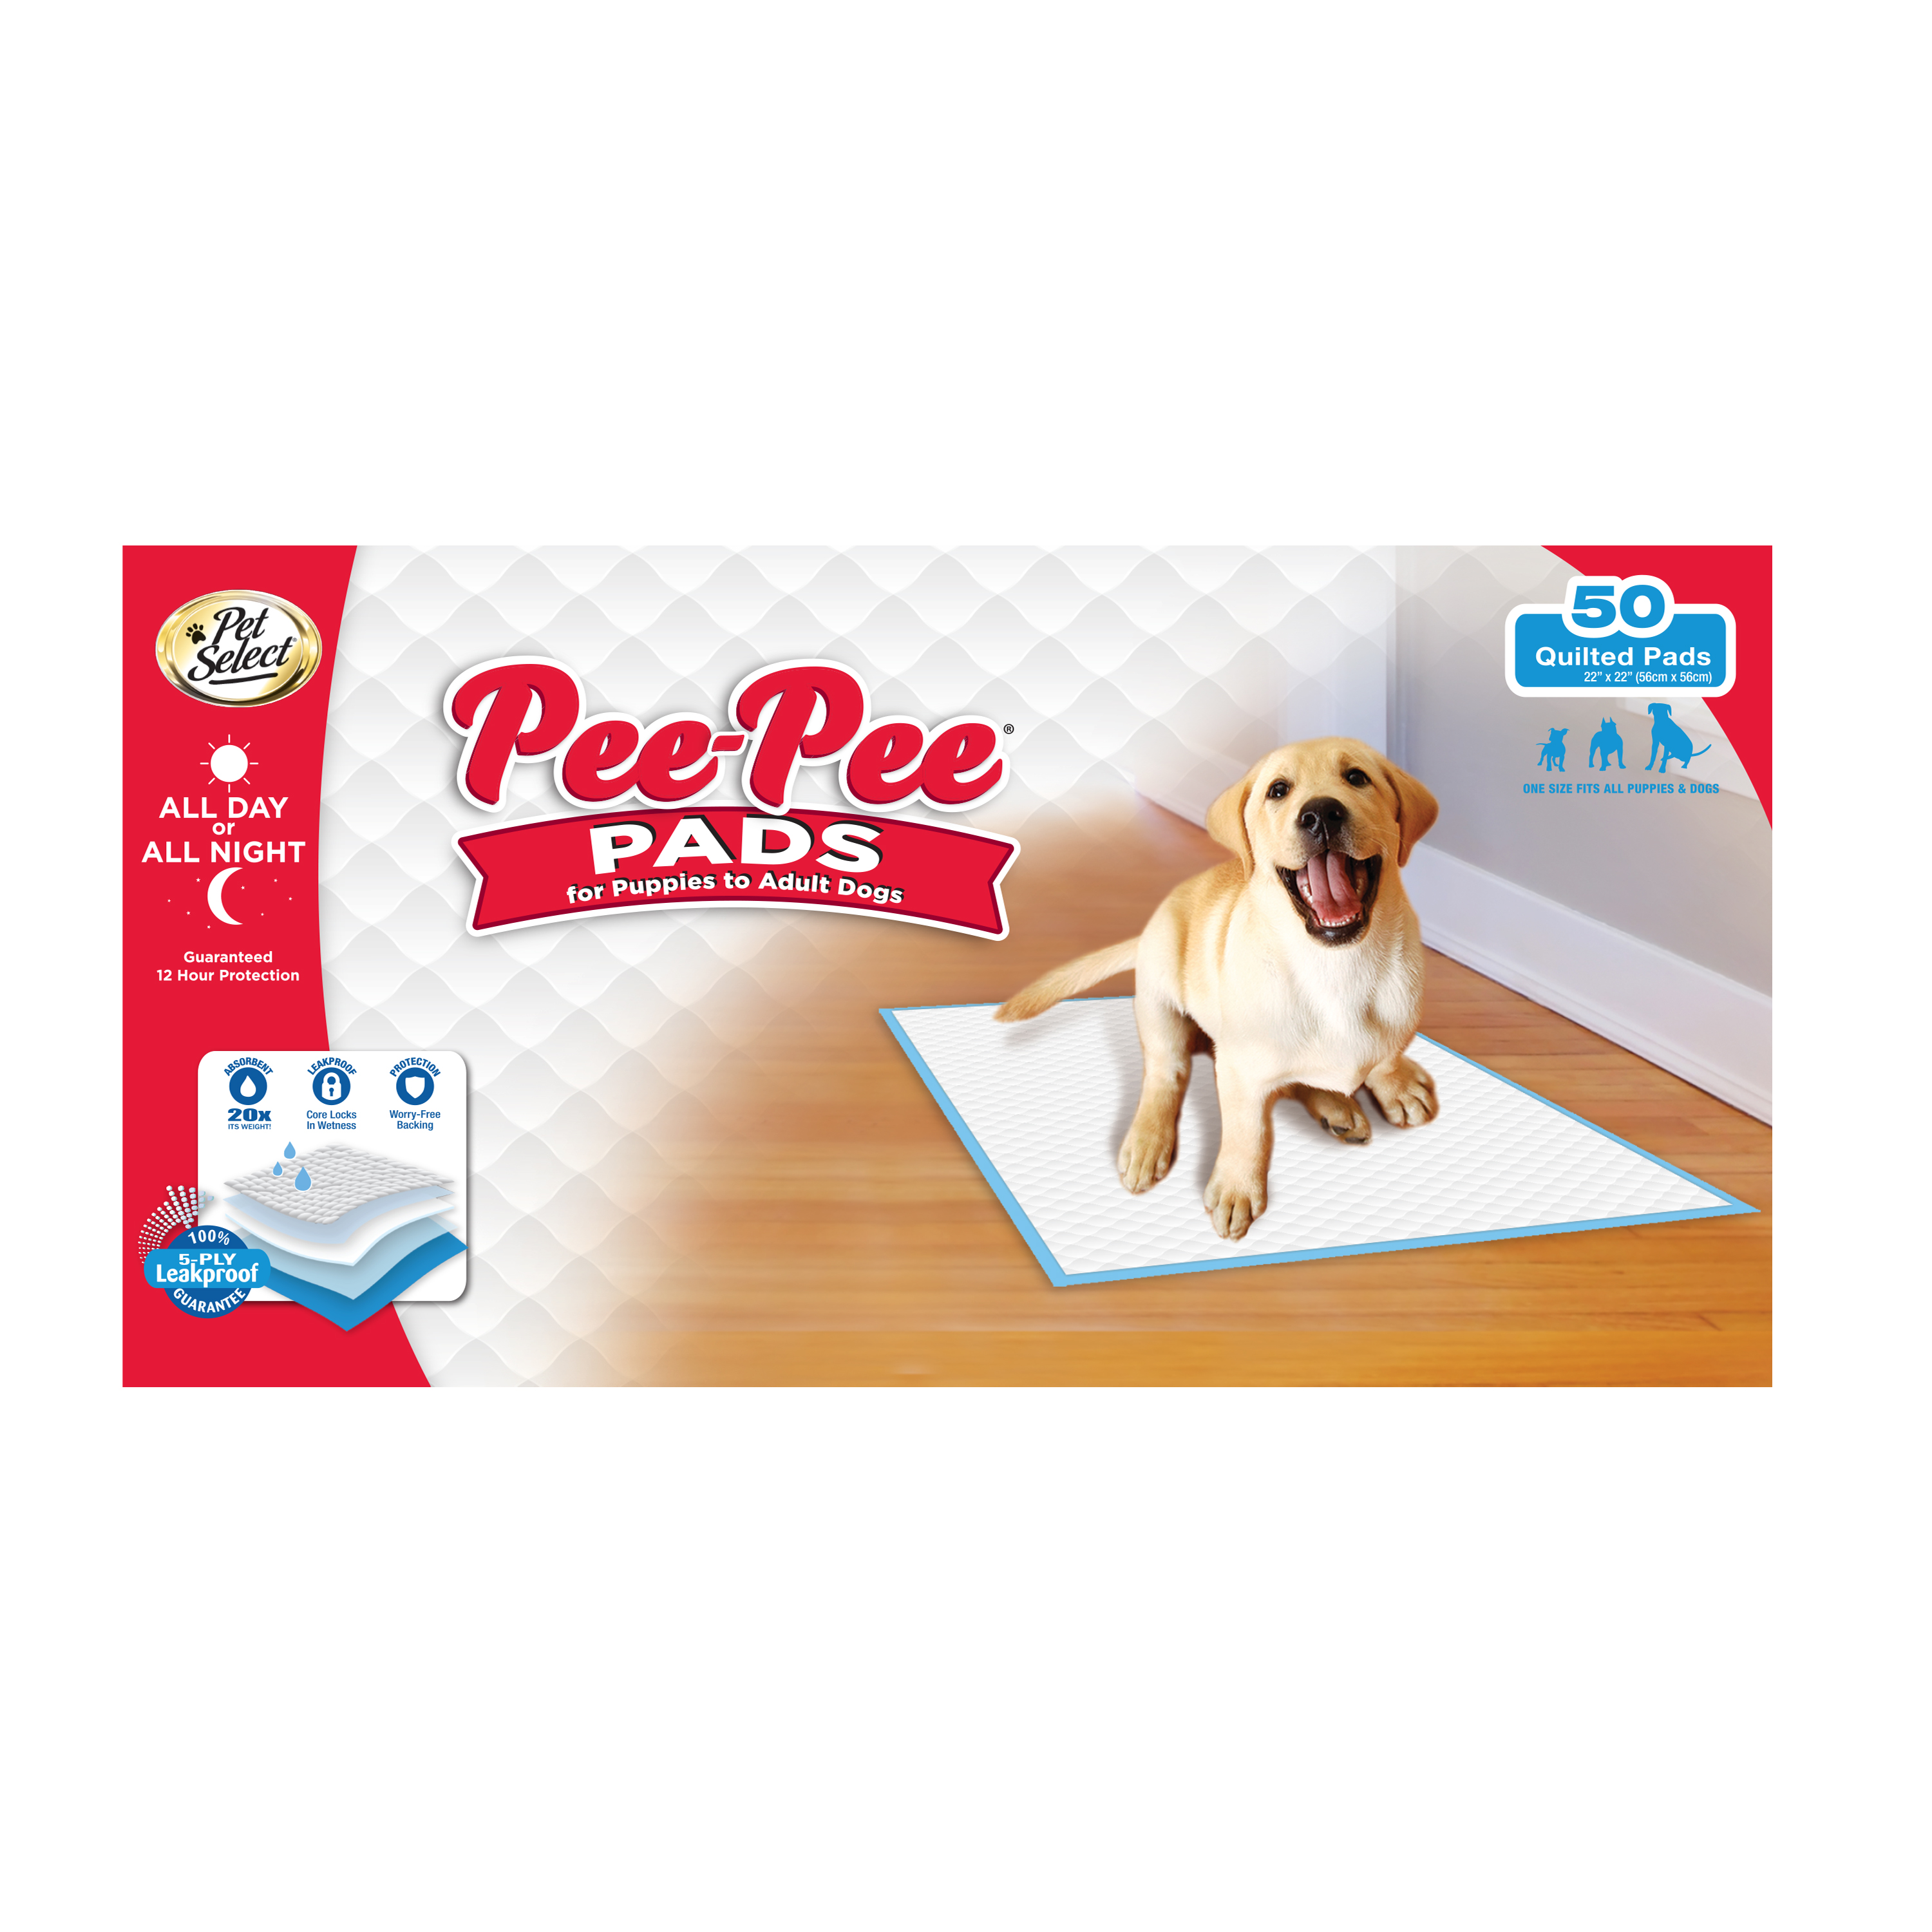 Four Paws Pet Select Pee Pee Pads for Dogs and Puppies 50 Count Standard 22" x 23" - image 1 of 8